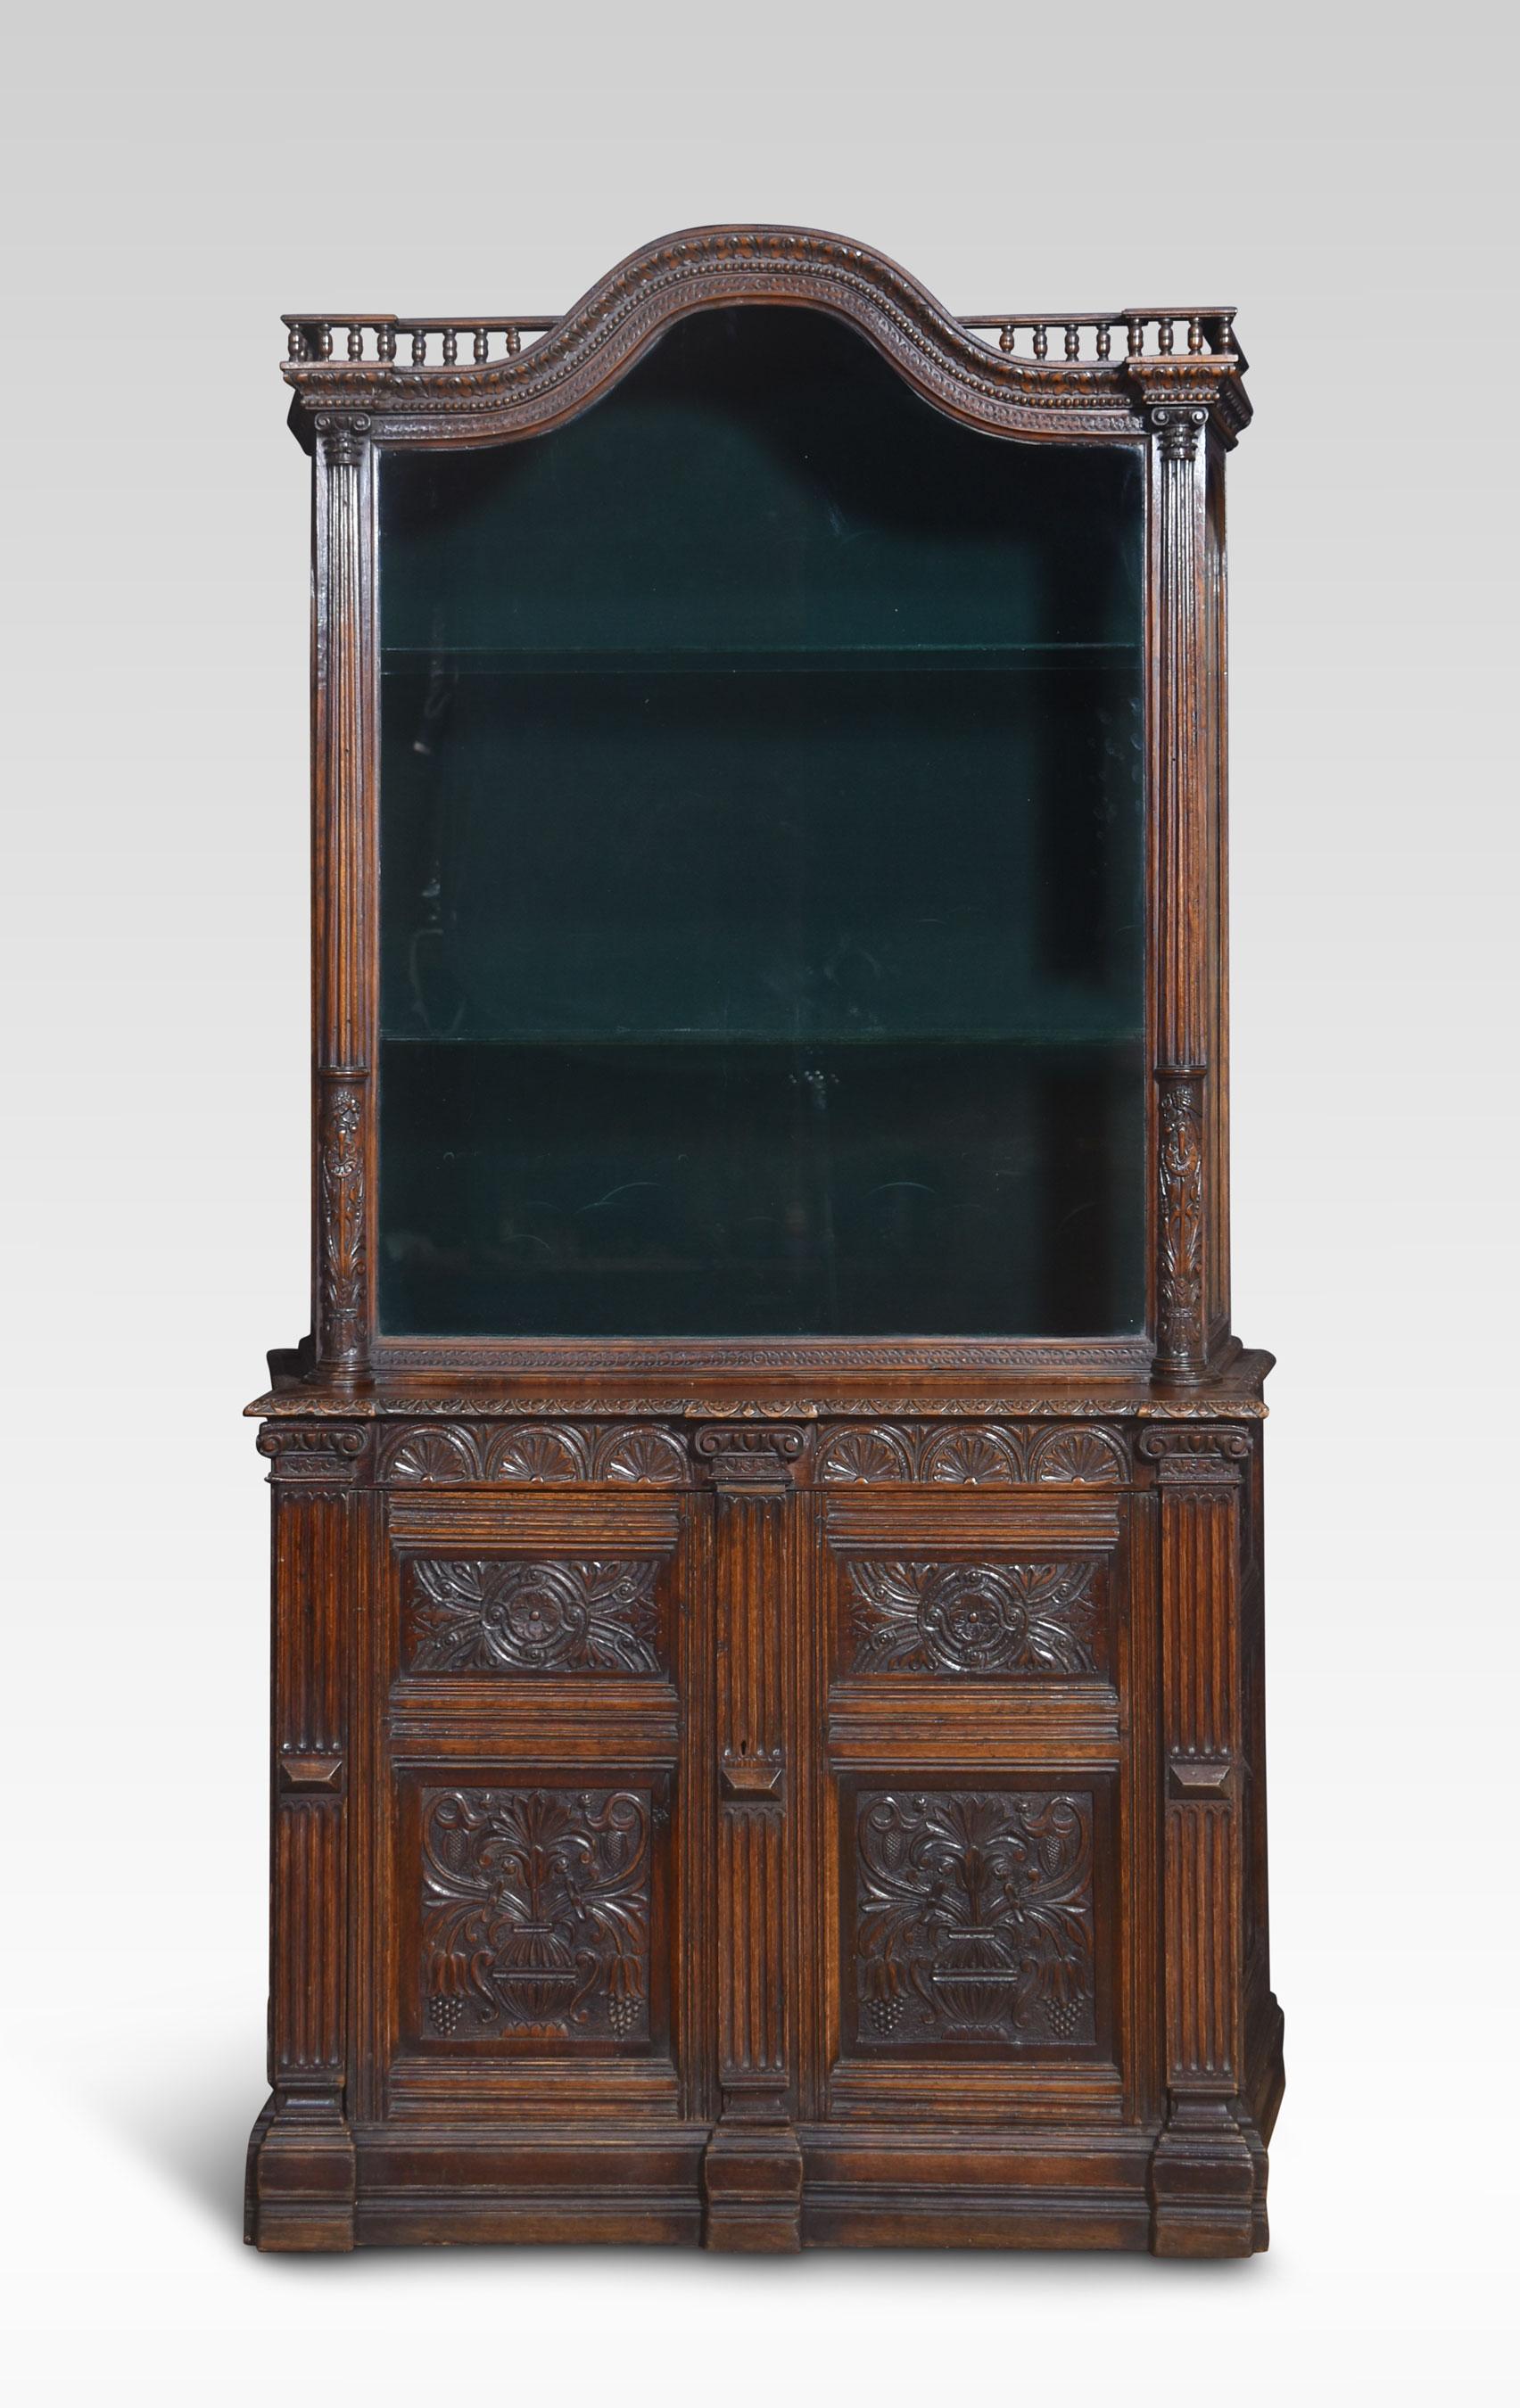 Oak display cabinet the shaped spindle top above large glazed door opening to reveal velvet lined interior and two glass shelves. To the heavily carved base section fitted with a pair of panelled doors with floral scrolling detail and reeded